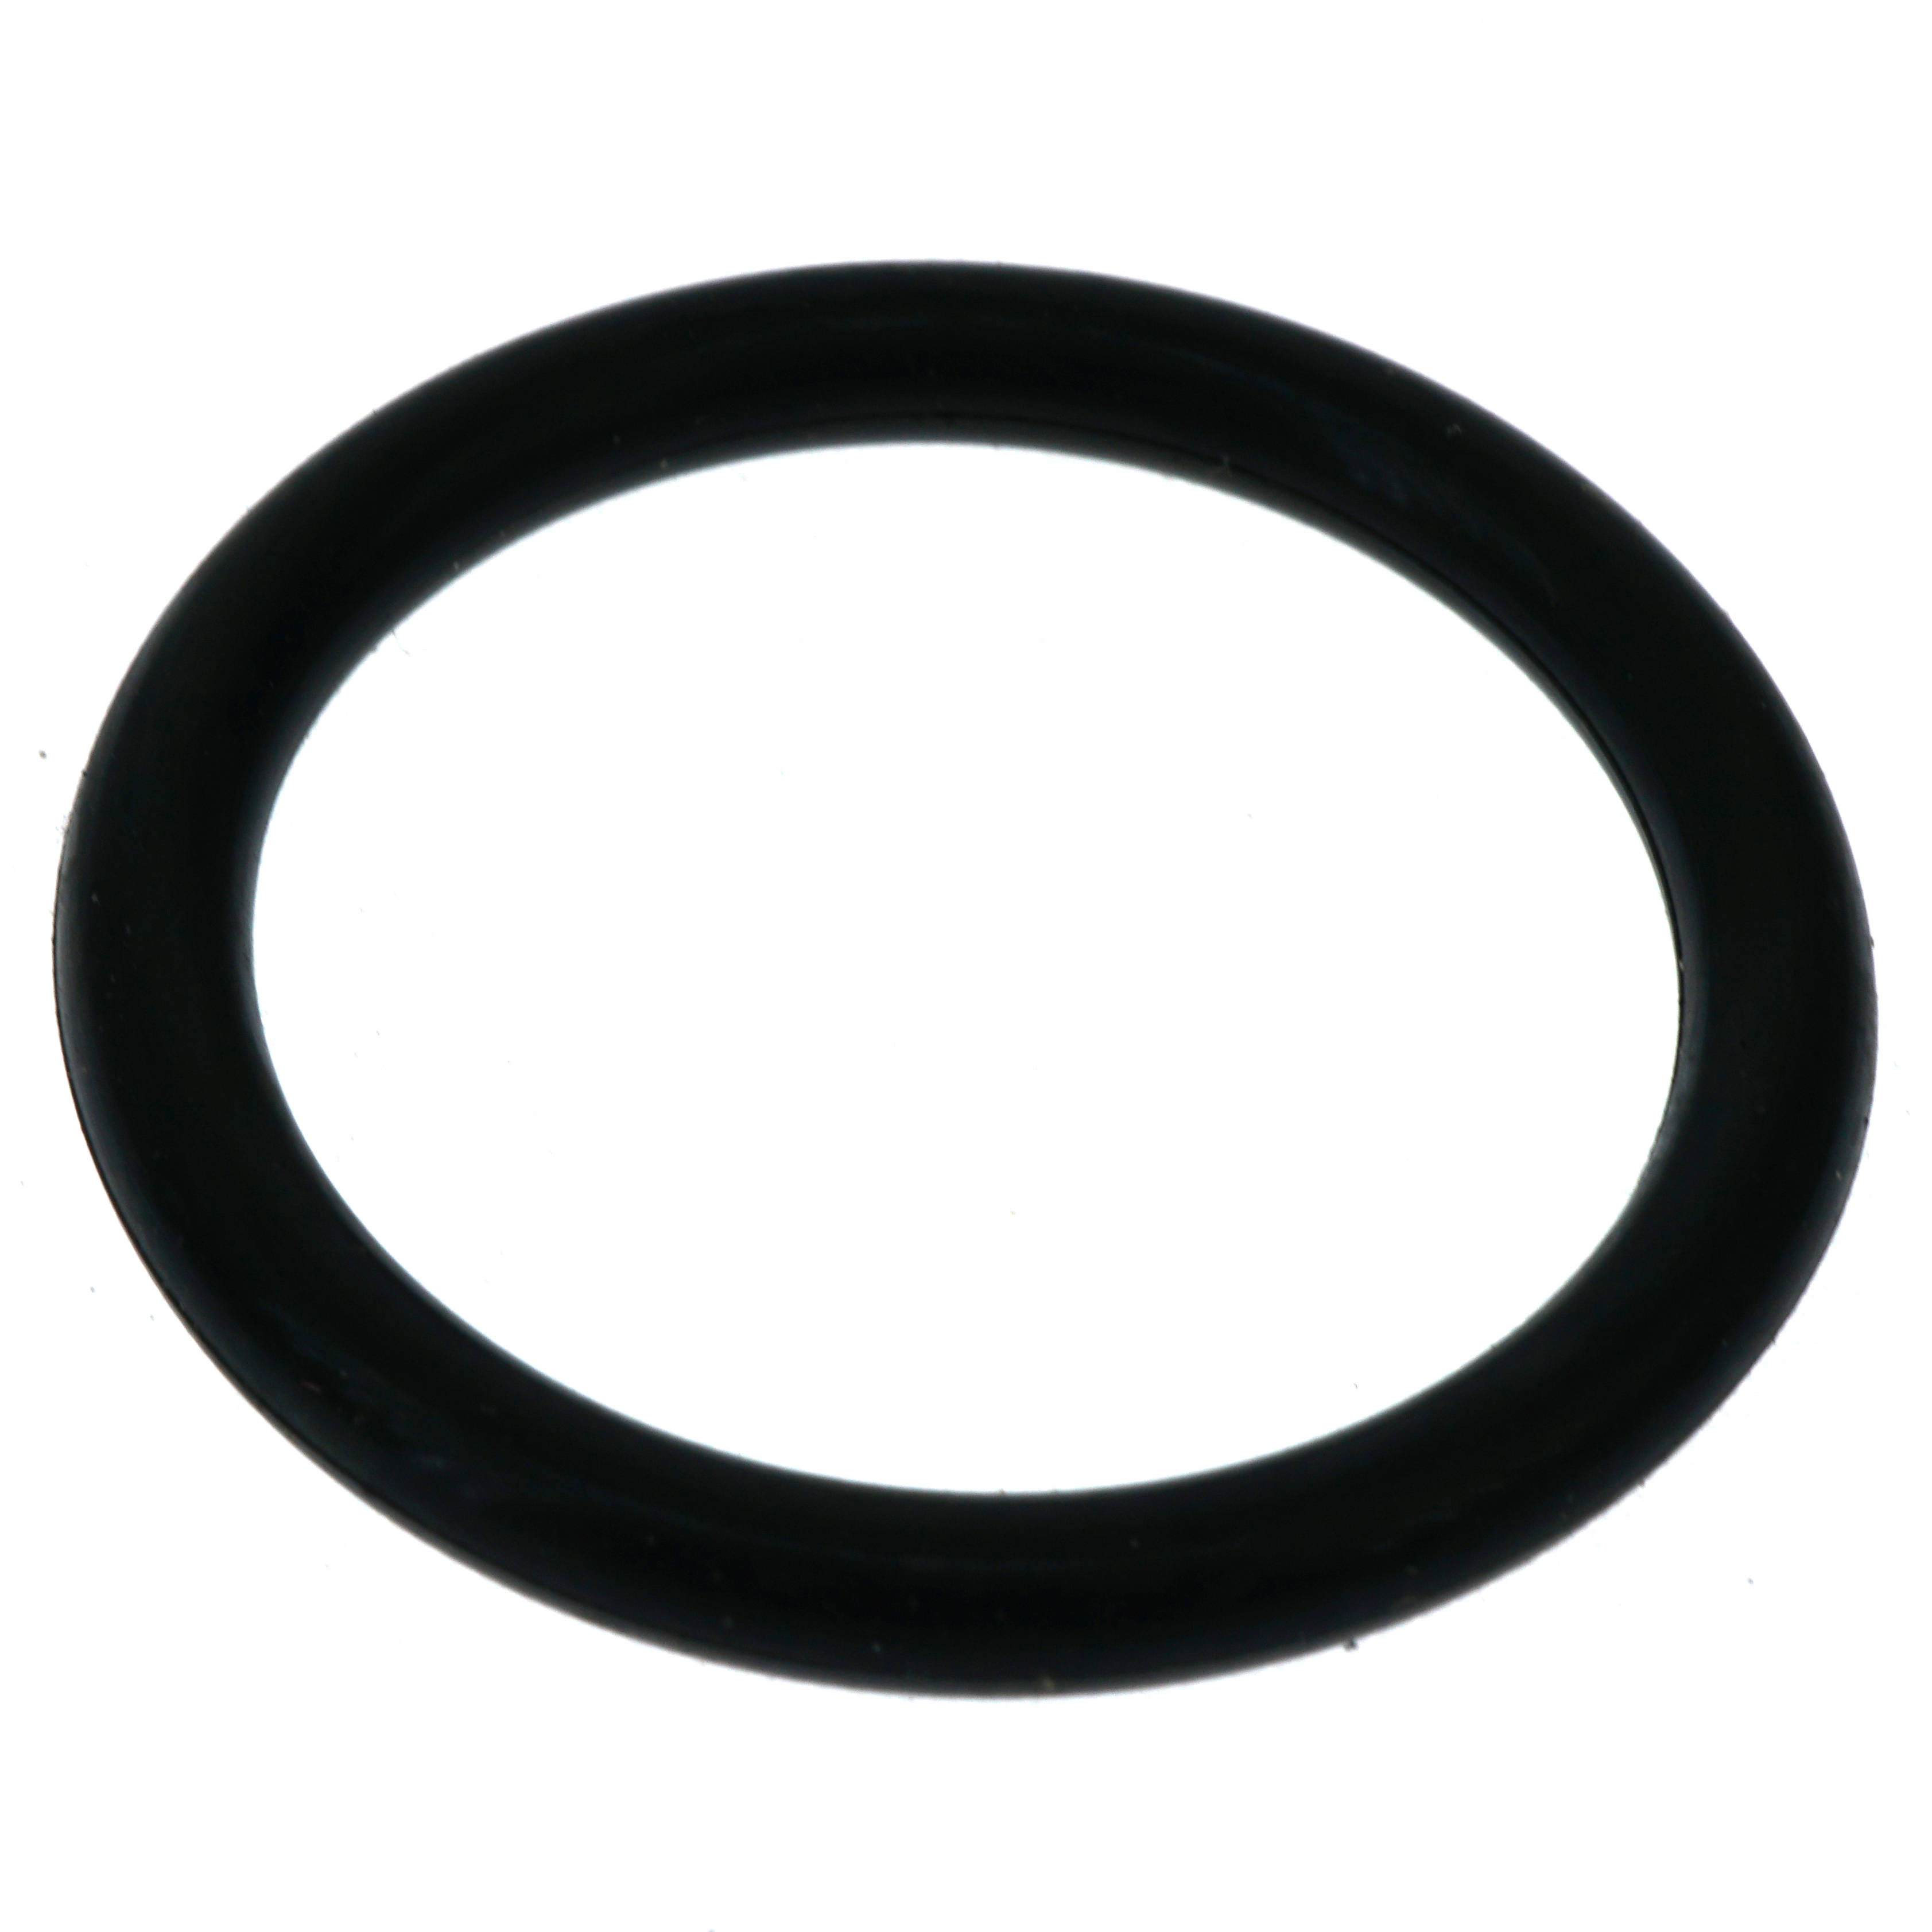 22mm ID 28mm OD 3mm Cross-Section 2x Nitrile Rubber O-Rings G22 Metric 